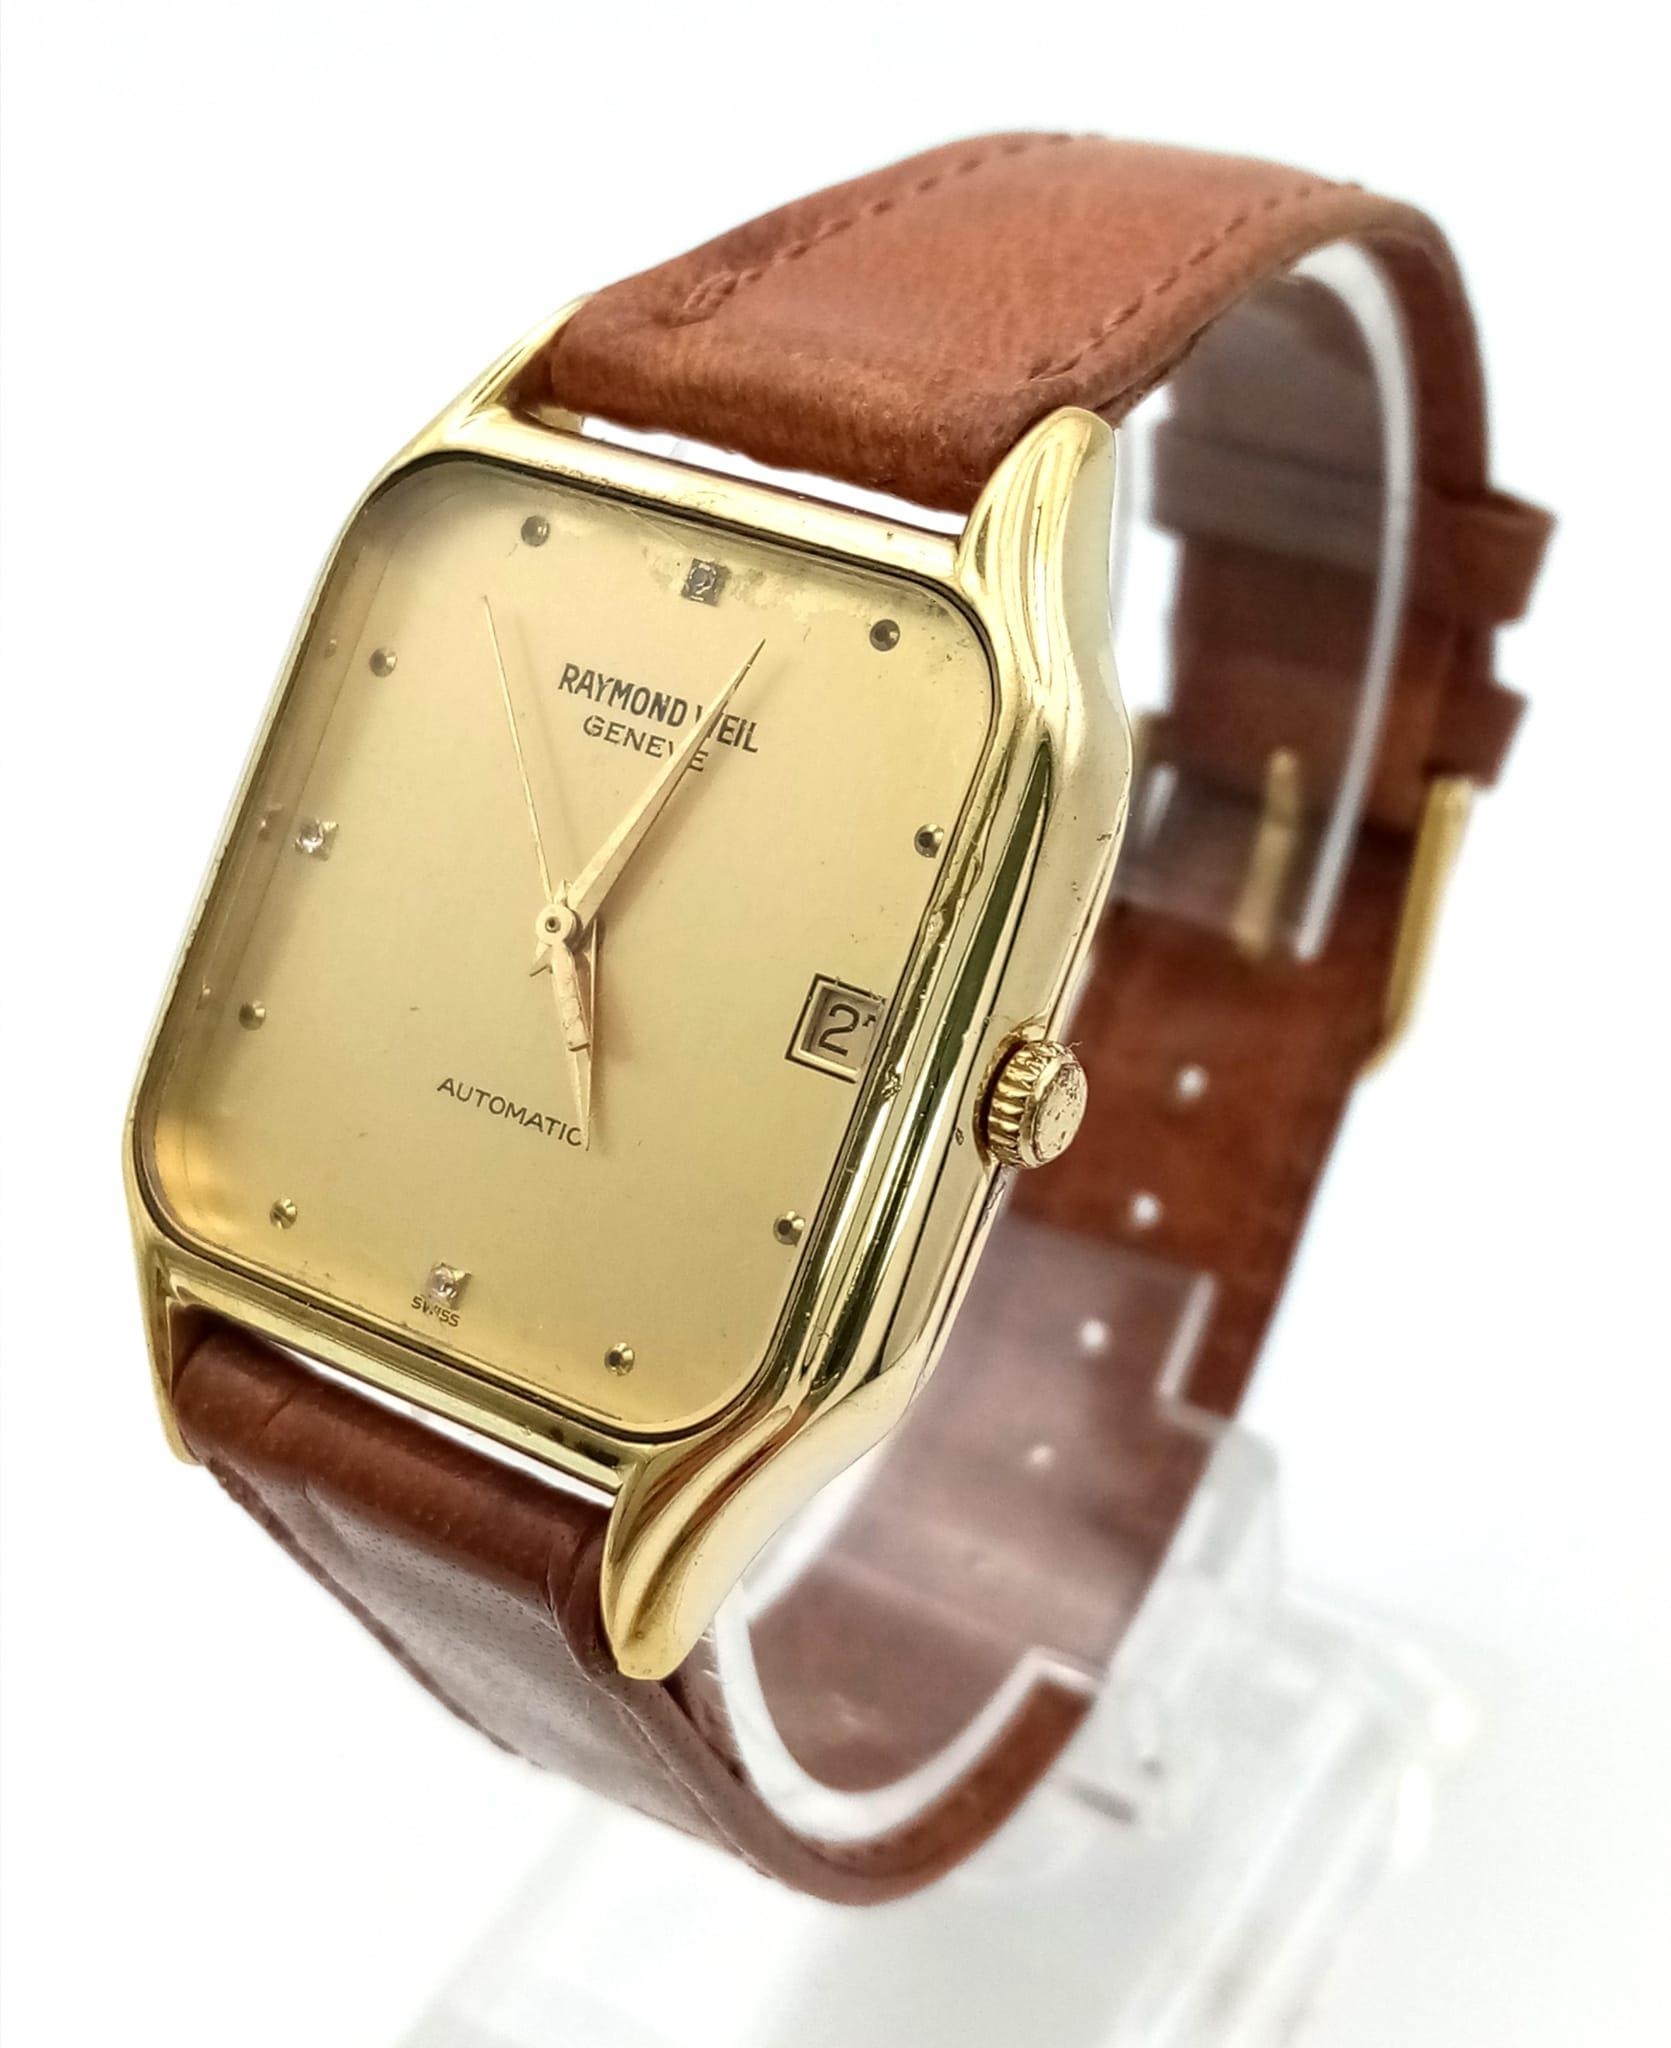 A Vintage Raymond Weil Automatic Gents Watch. Brown leather strap. Square case - 30 x 30mm. Gilded - Image 2 of 4